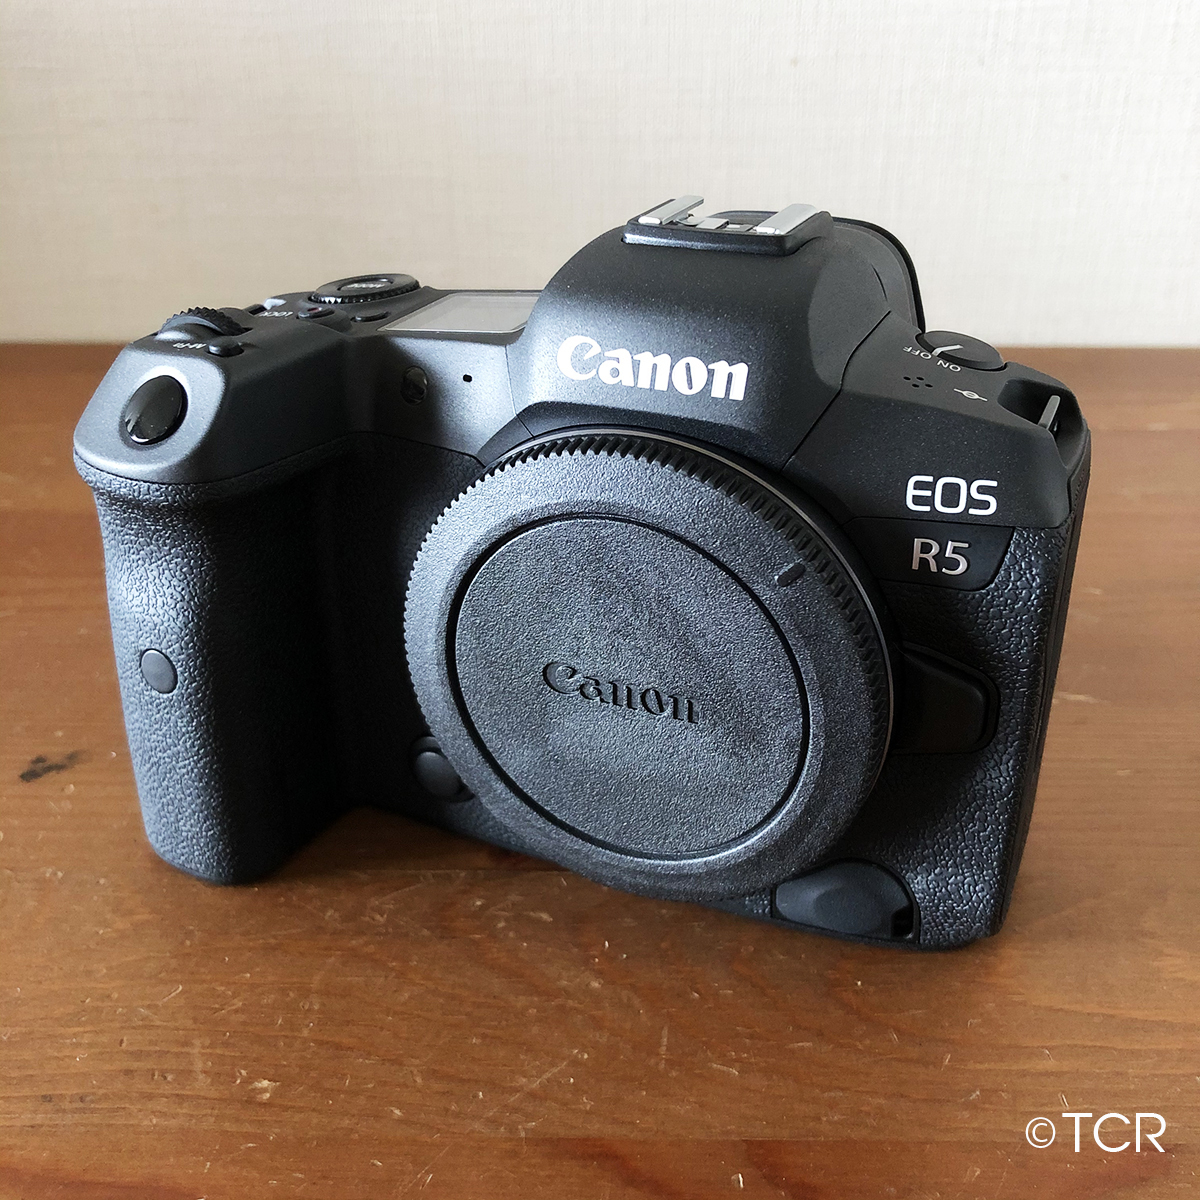  home delivery rental 3 day # Canon EOS R5 body #4980 jpy /3 day 